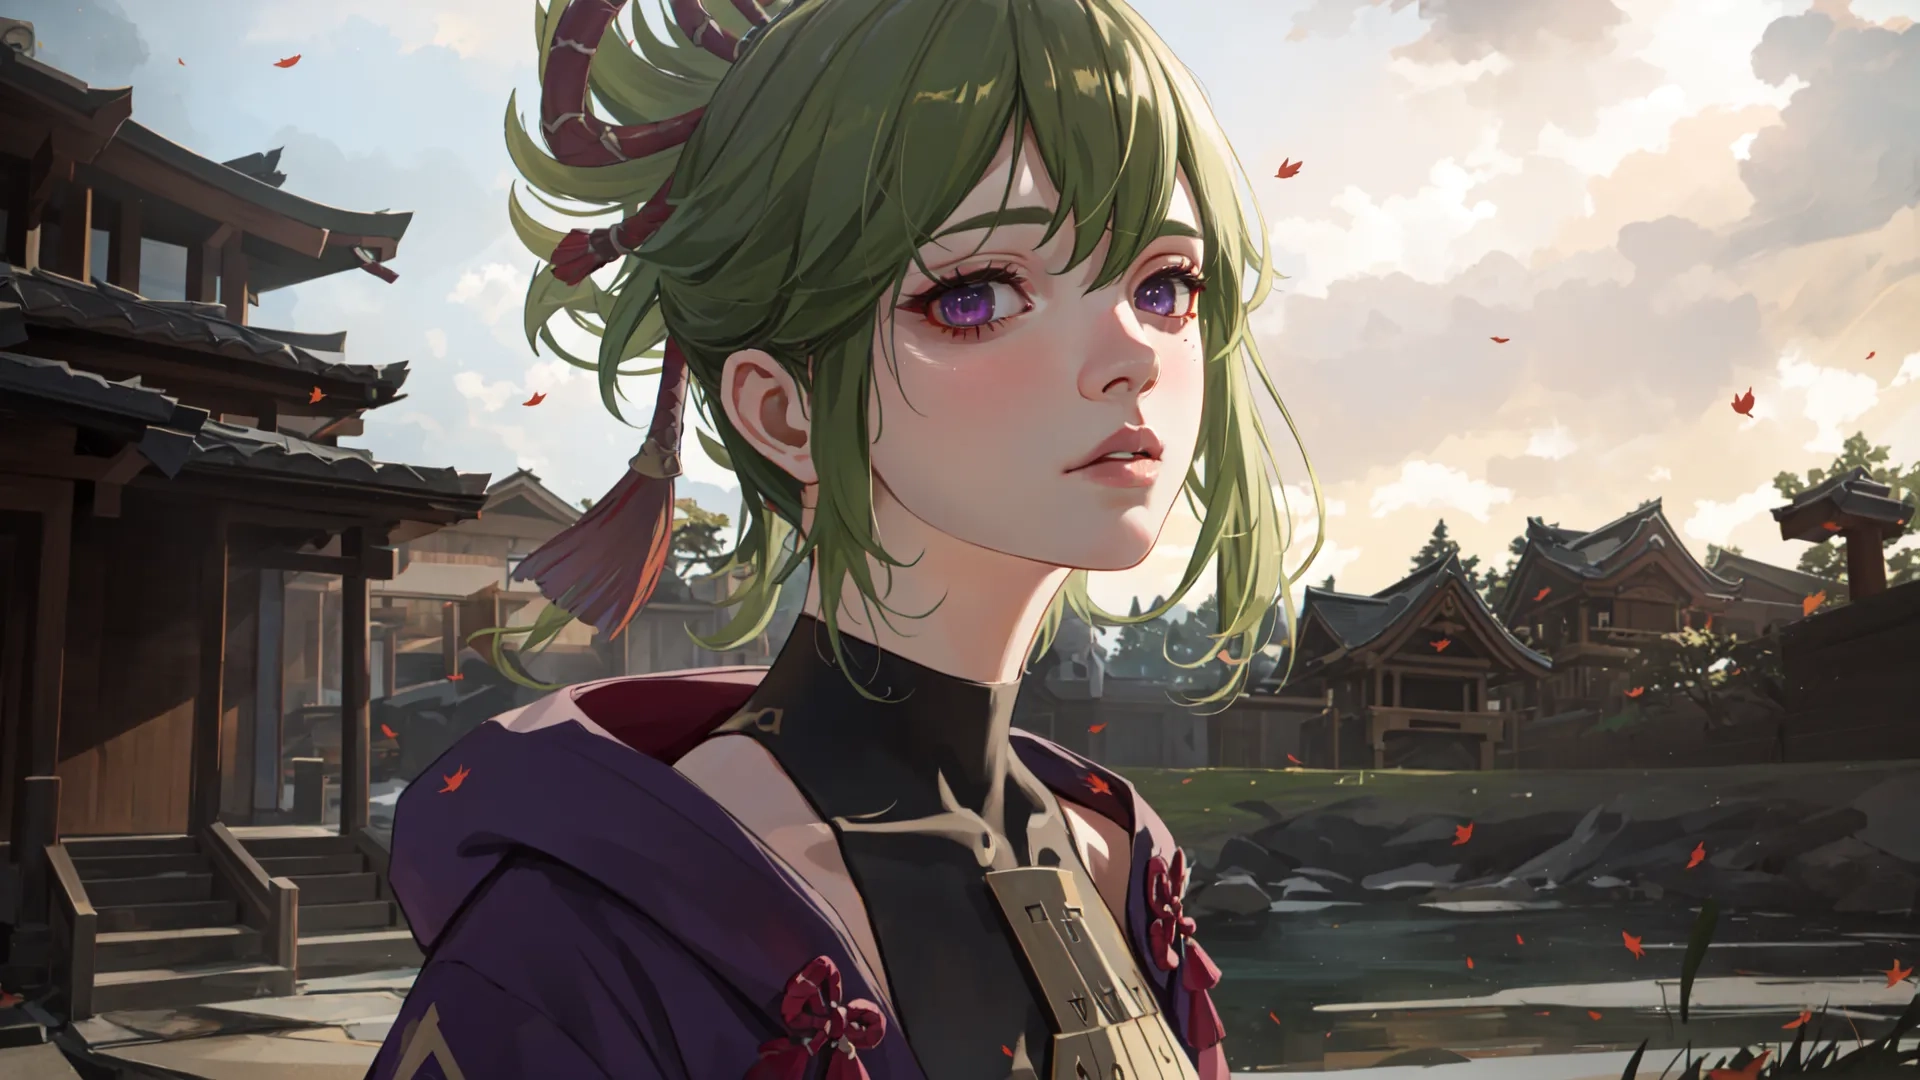 a anime girl with a bushy - hair and green hair, standing in front of an old building surrounded by leaves near water at sunset
